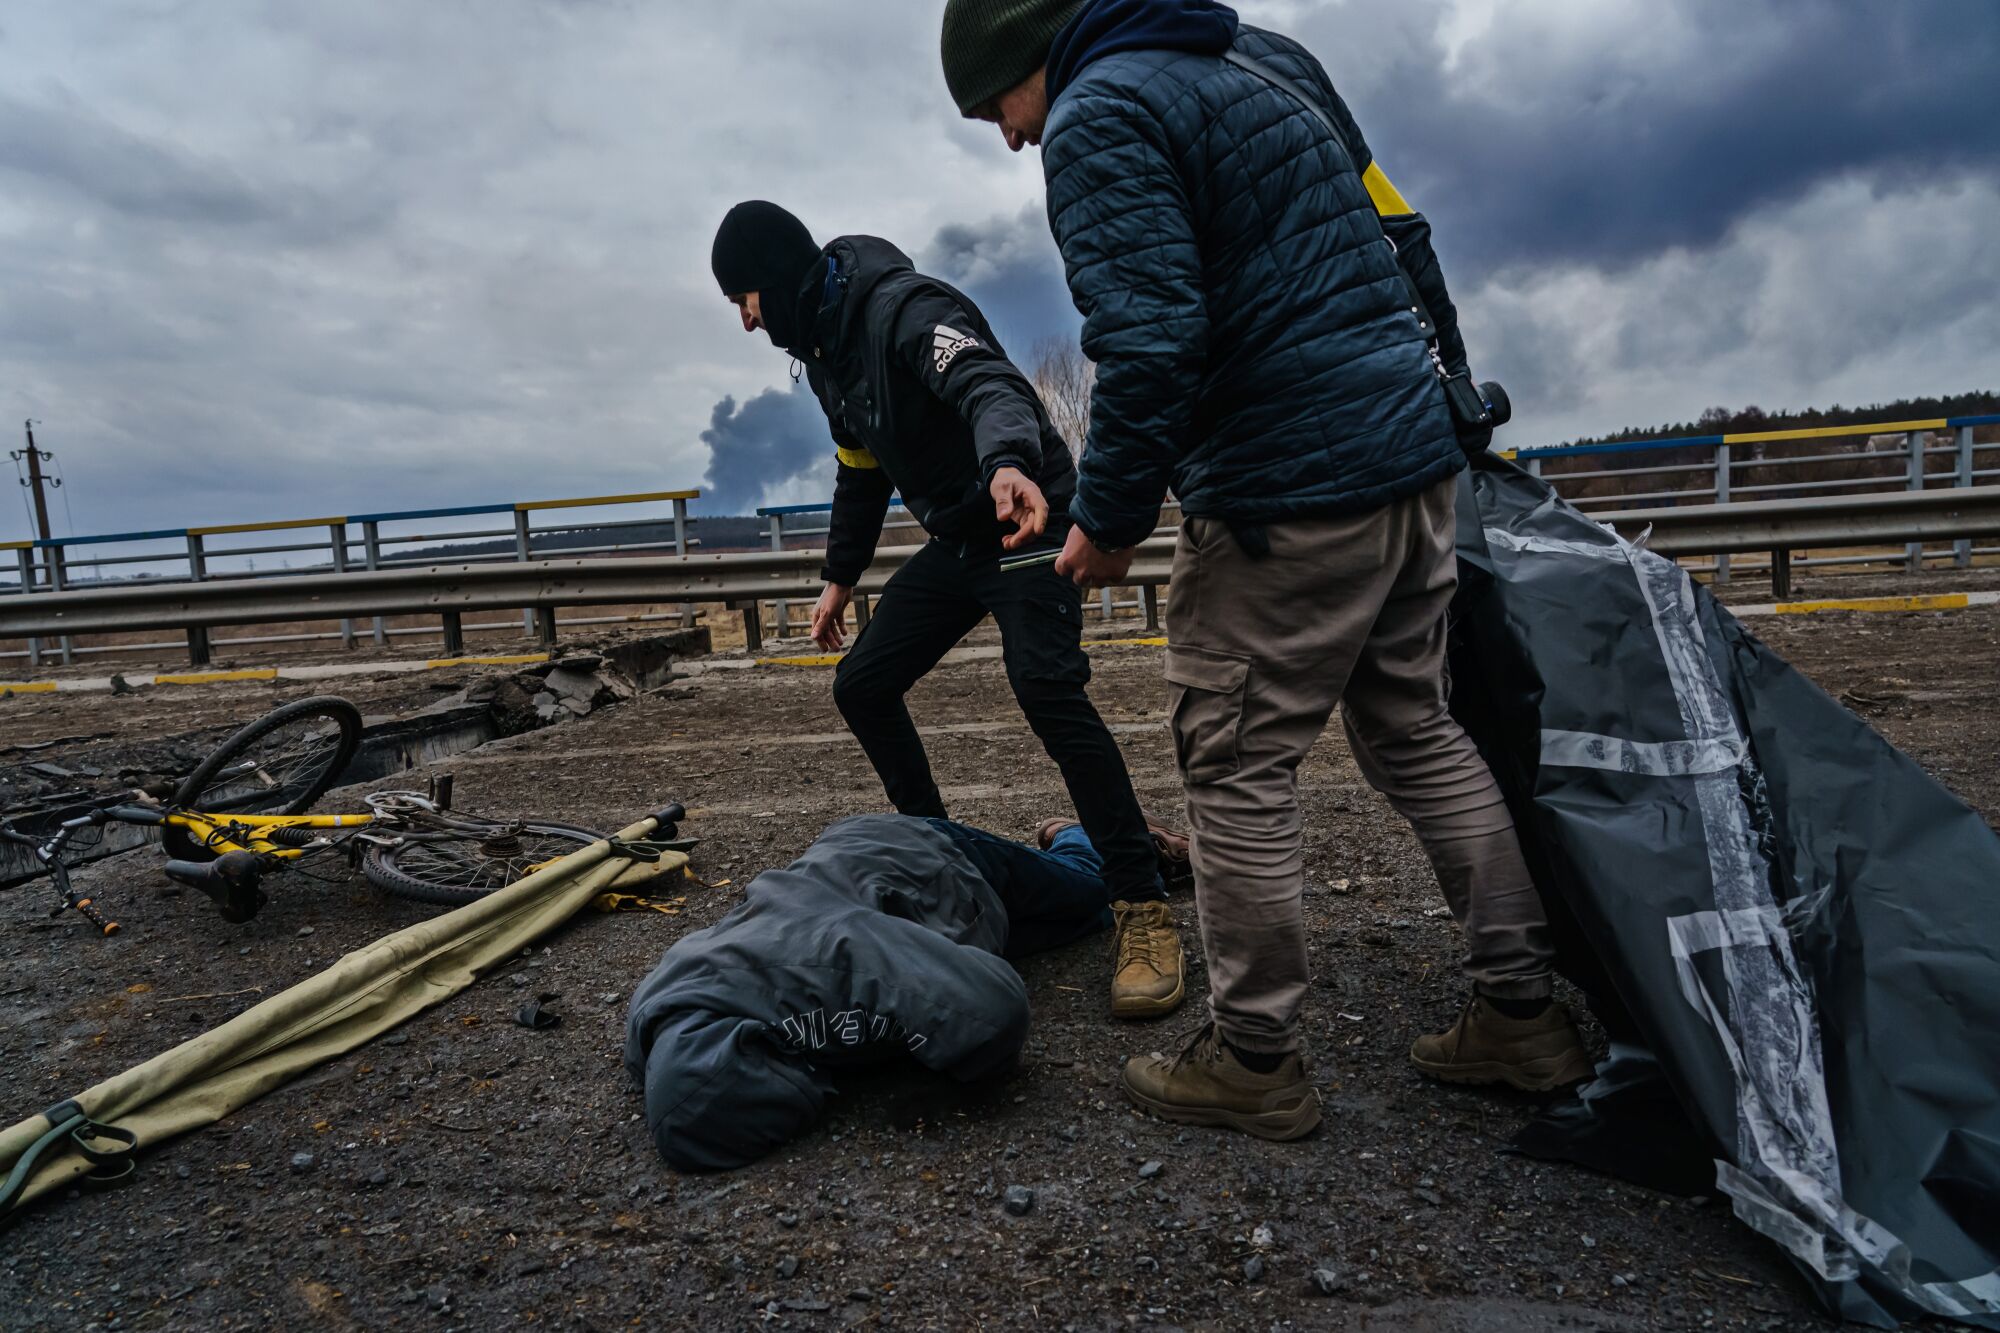 Two men prepare to move a body on the ground